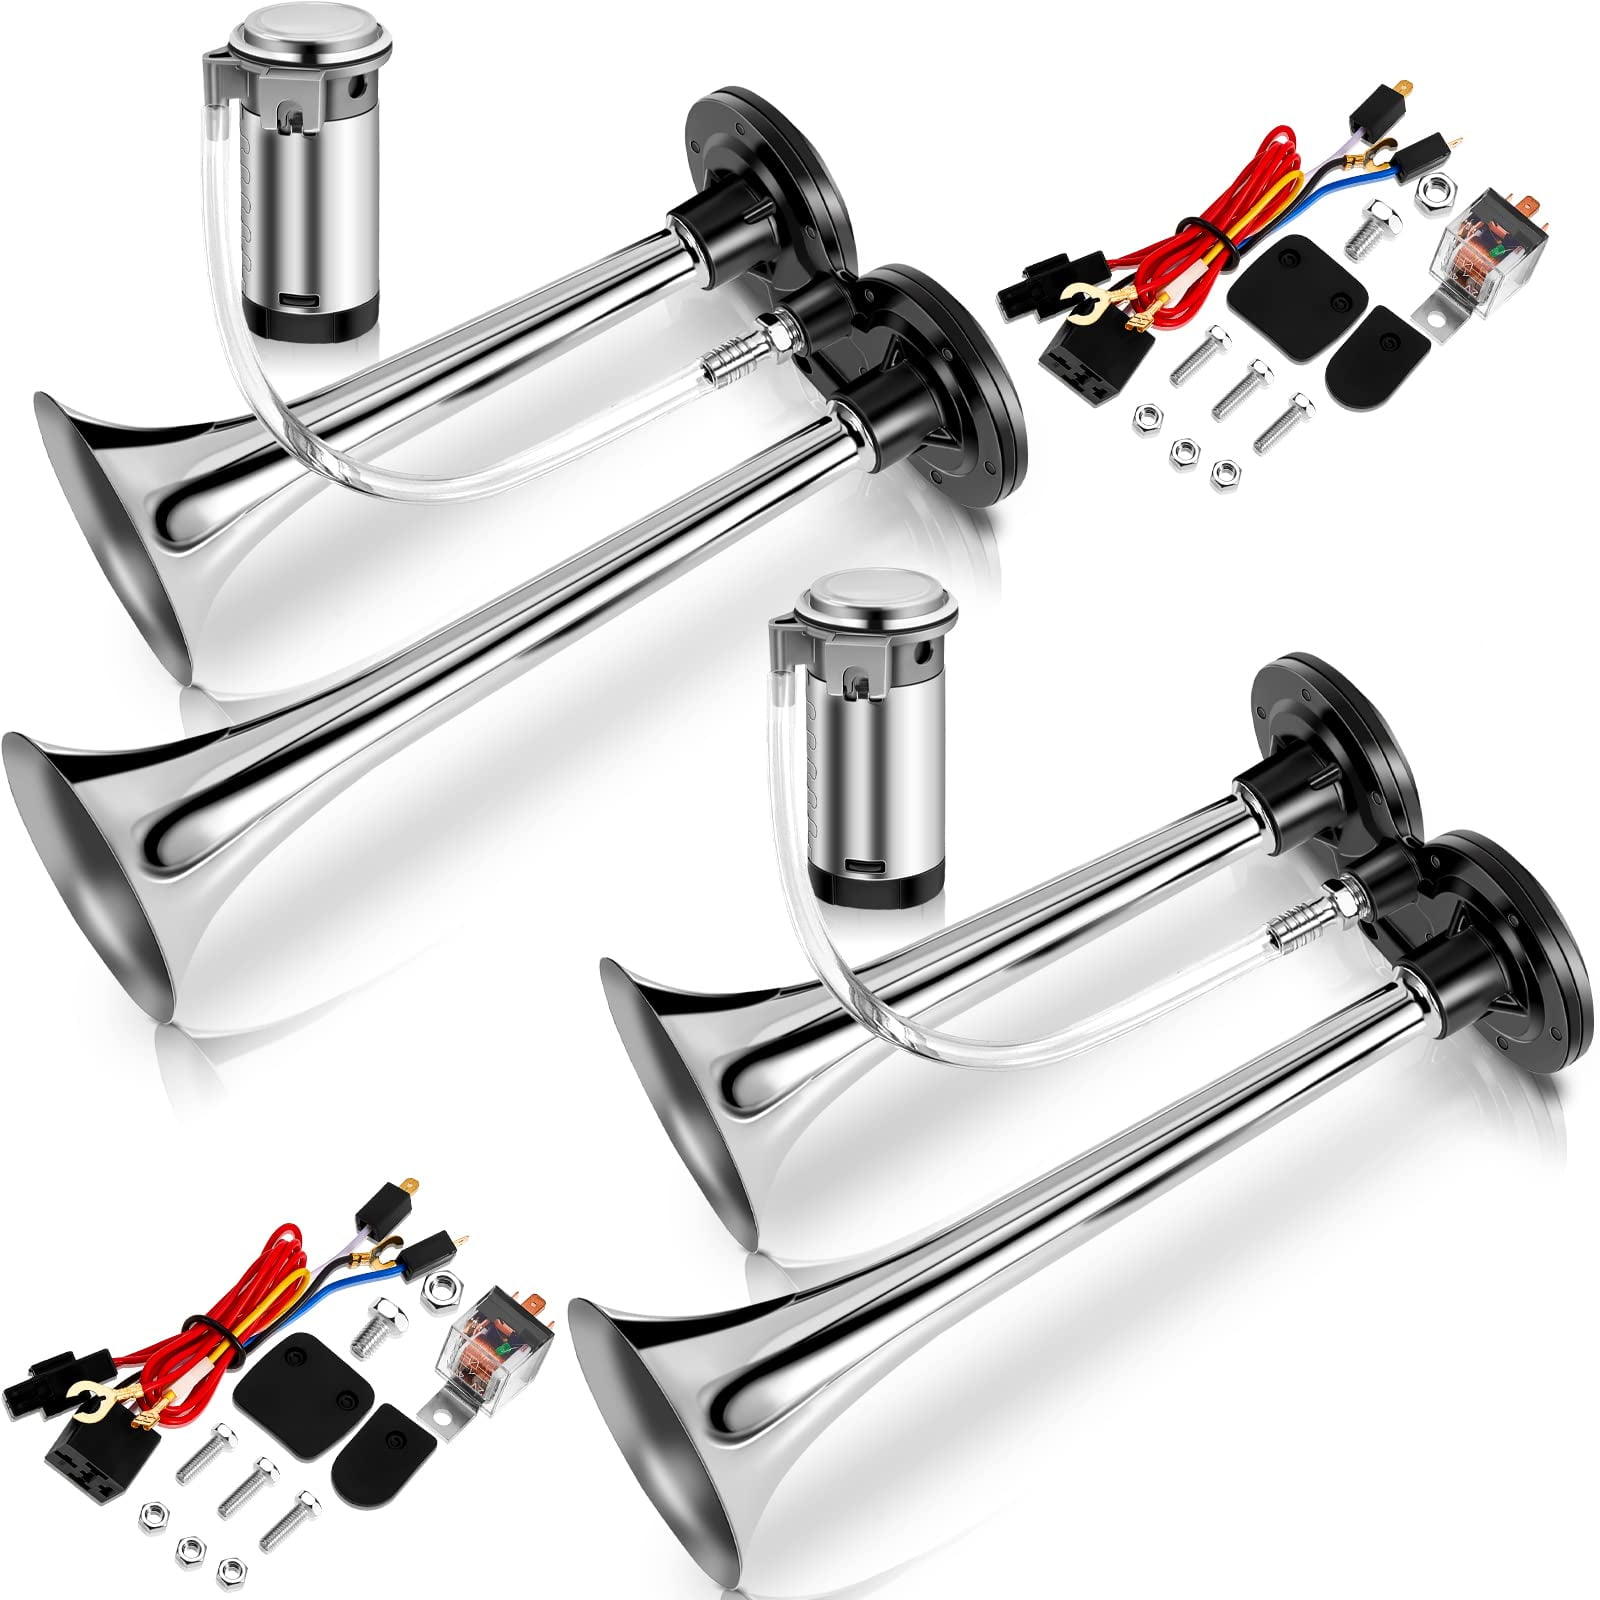 Tallew Pack 12V 150db Super Loud Air Horn Kit for Truck Boats Car with Air  Compressor and Wire Harness Electric Train Horn Chrome Zinc Dual Trumpet  Air Horns for Any 12V